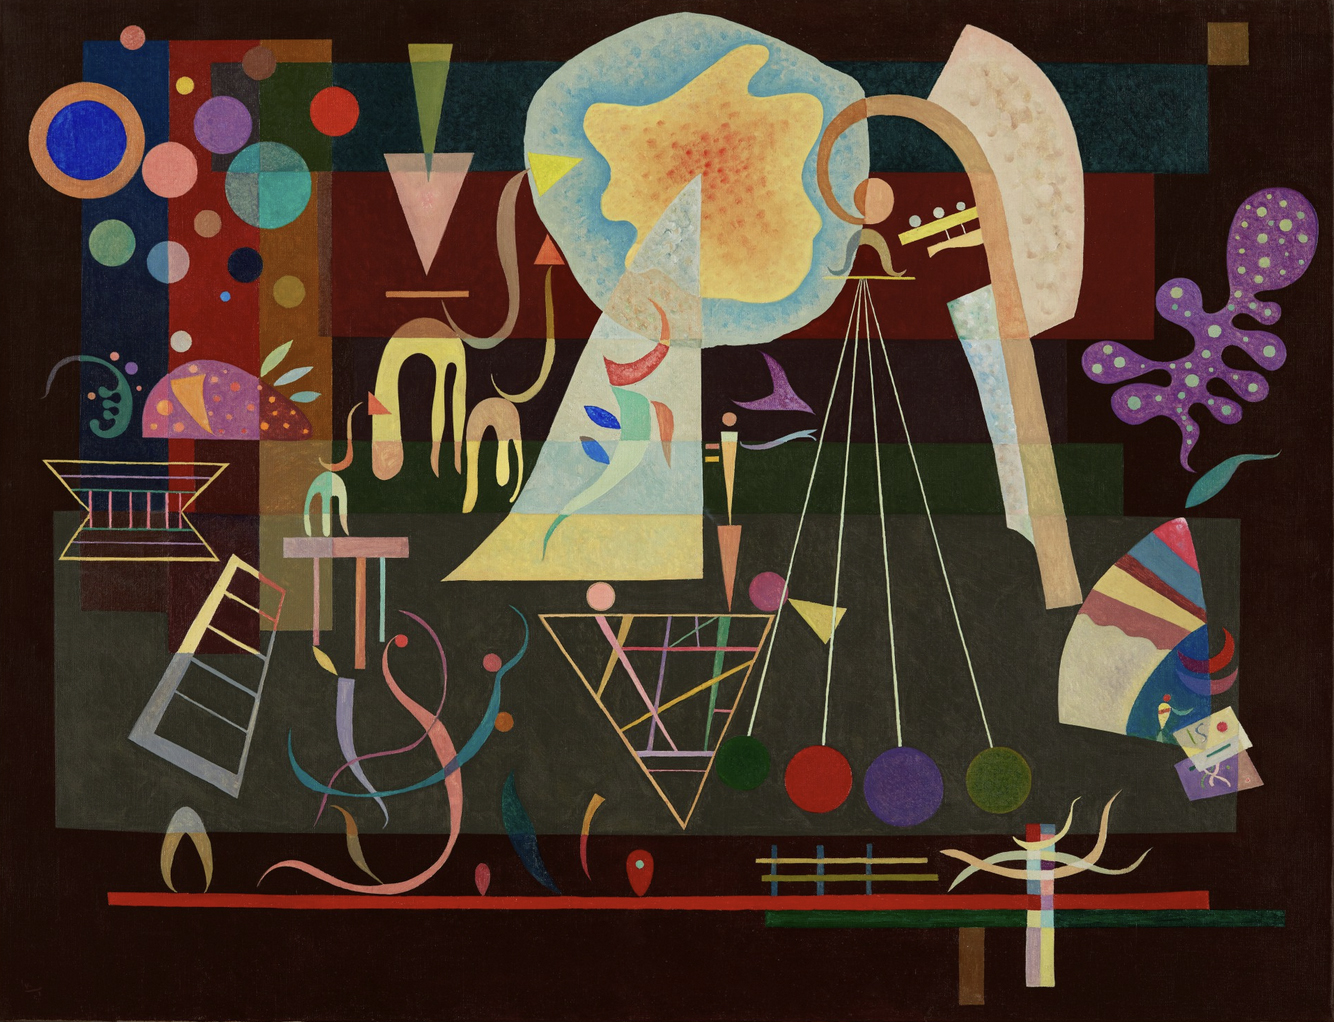 IN 2021, Kandinsky saw his Calmed Tensions (1937) fetch $29.3 M: the second highest result for a work by the father of Abstraction